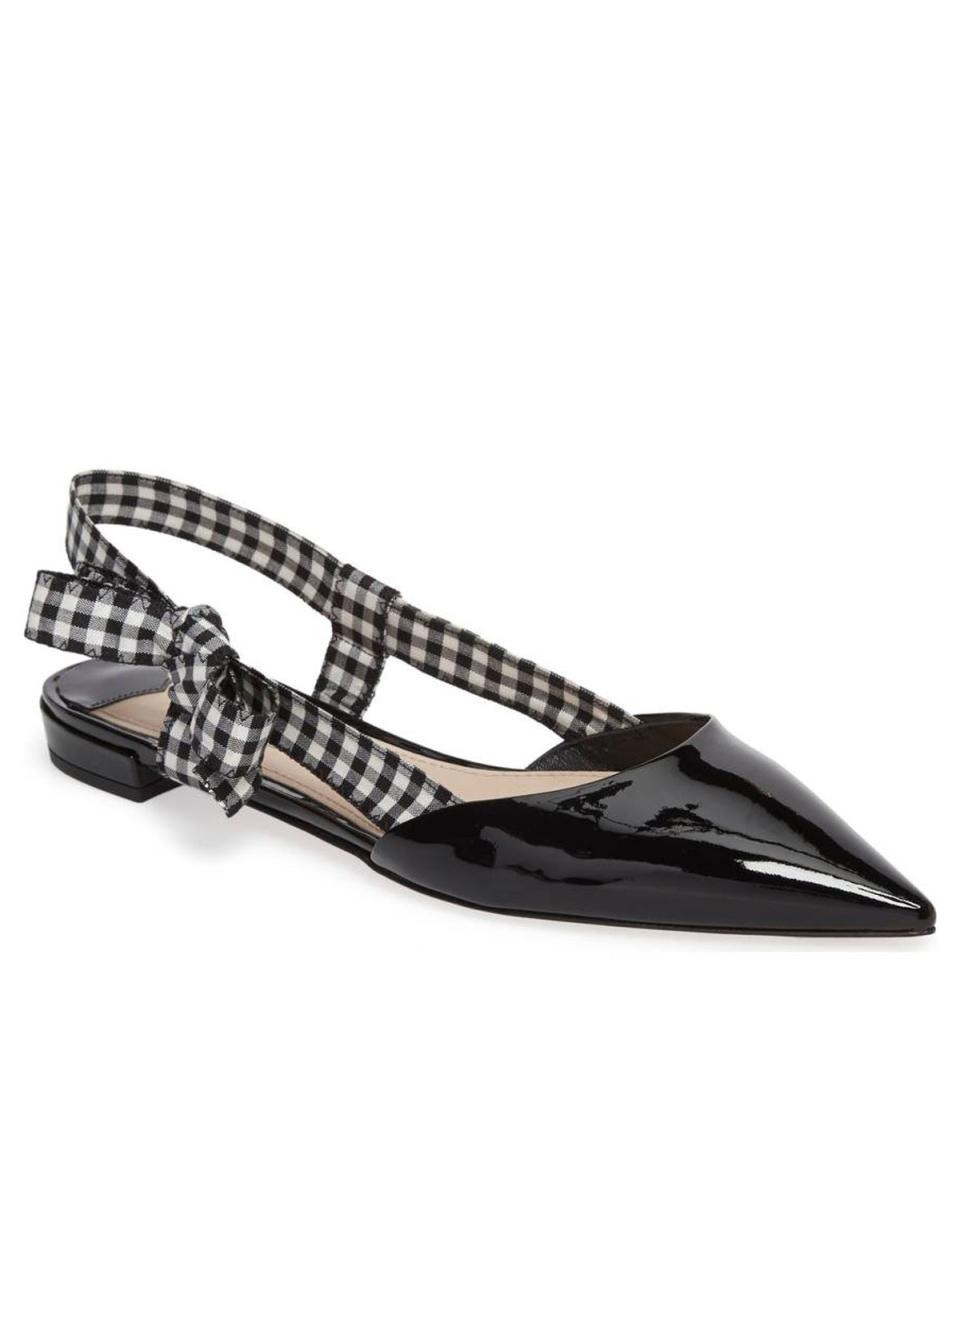 "The pointy-toe Miu Miu slingback is a chic, classic style, and I love that this one has a cute gingham detail—oh, and that it's $354, down from $590." —IH